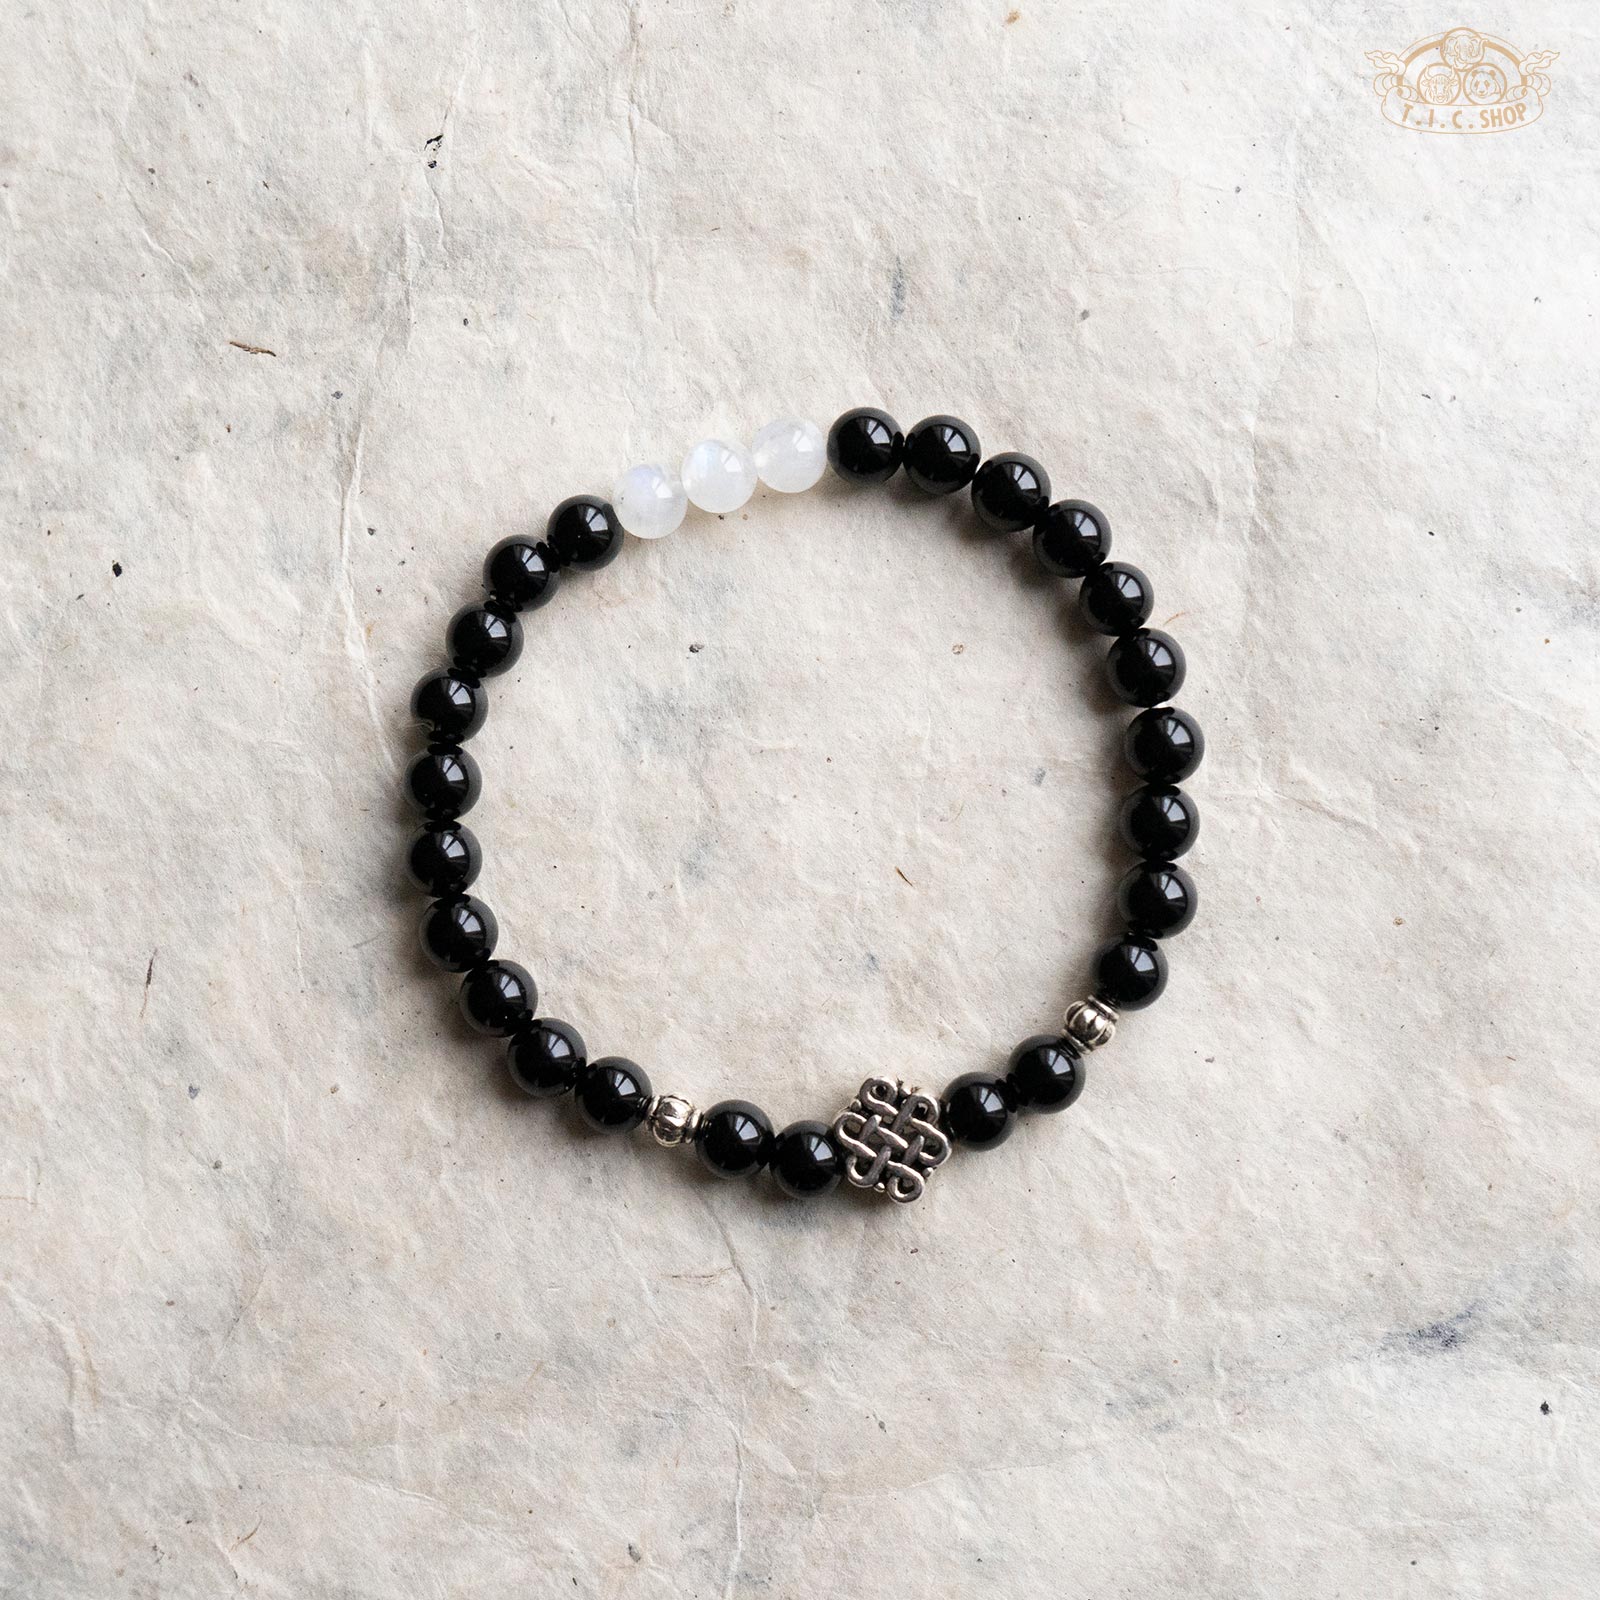 'Endless Delight' Obsidian 6mm Beads Bracelet with Endless Knot Symbol